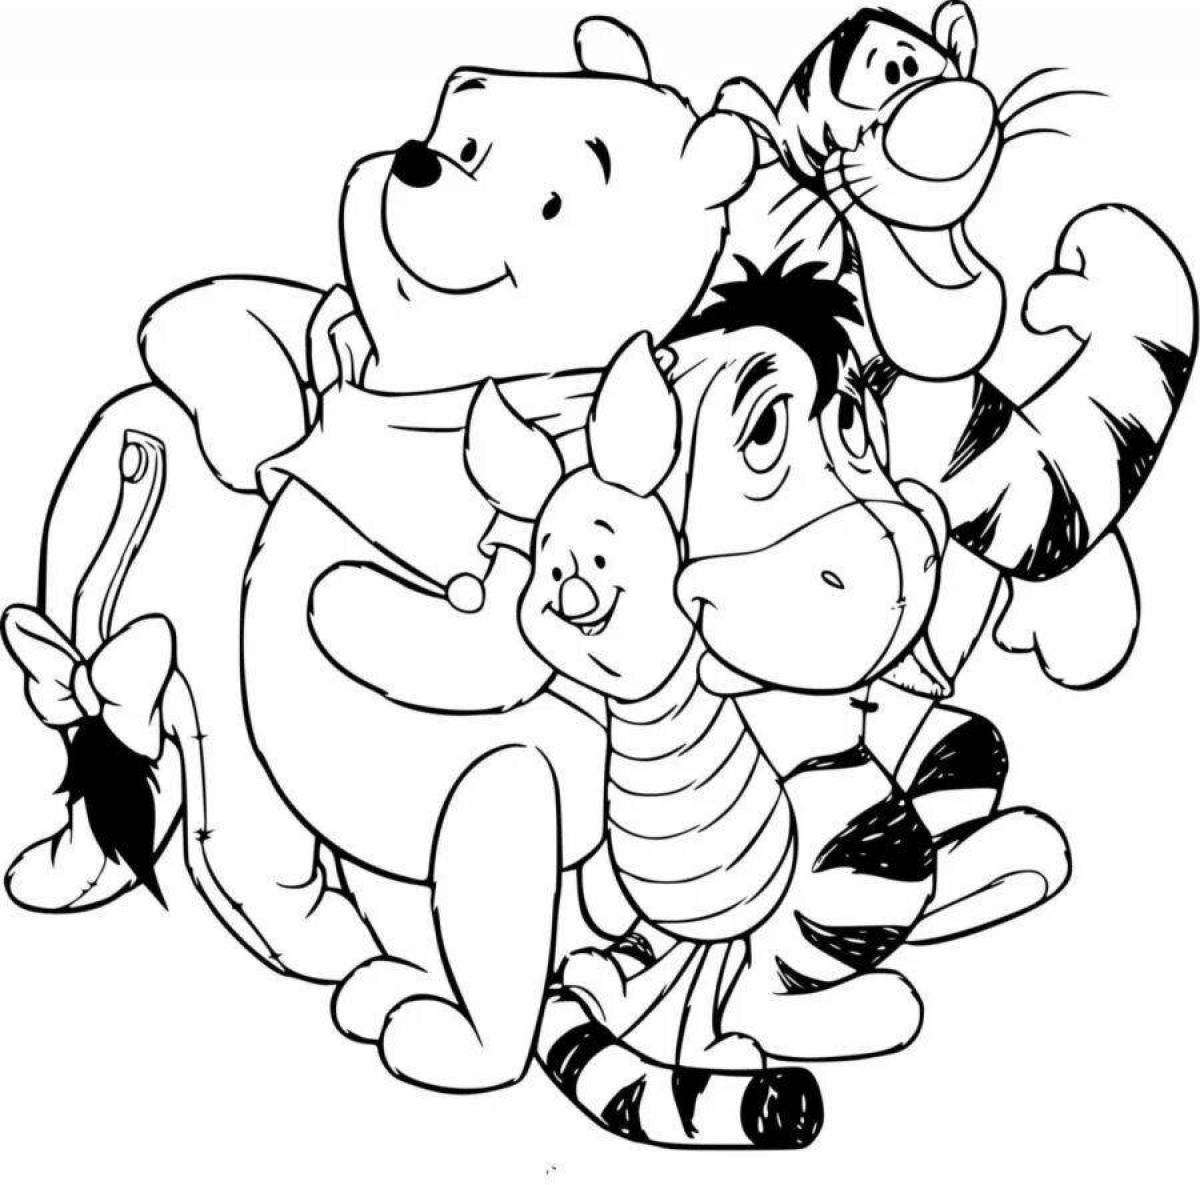 Cute winnie the pooh and friends coloring book